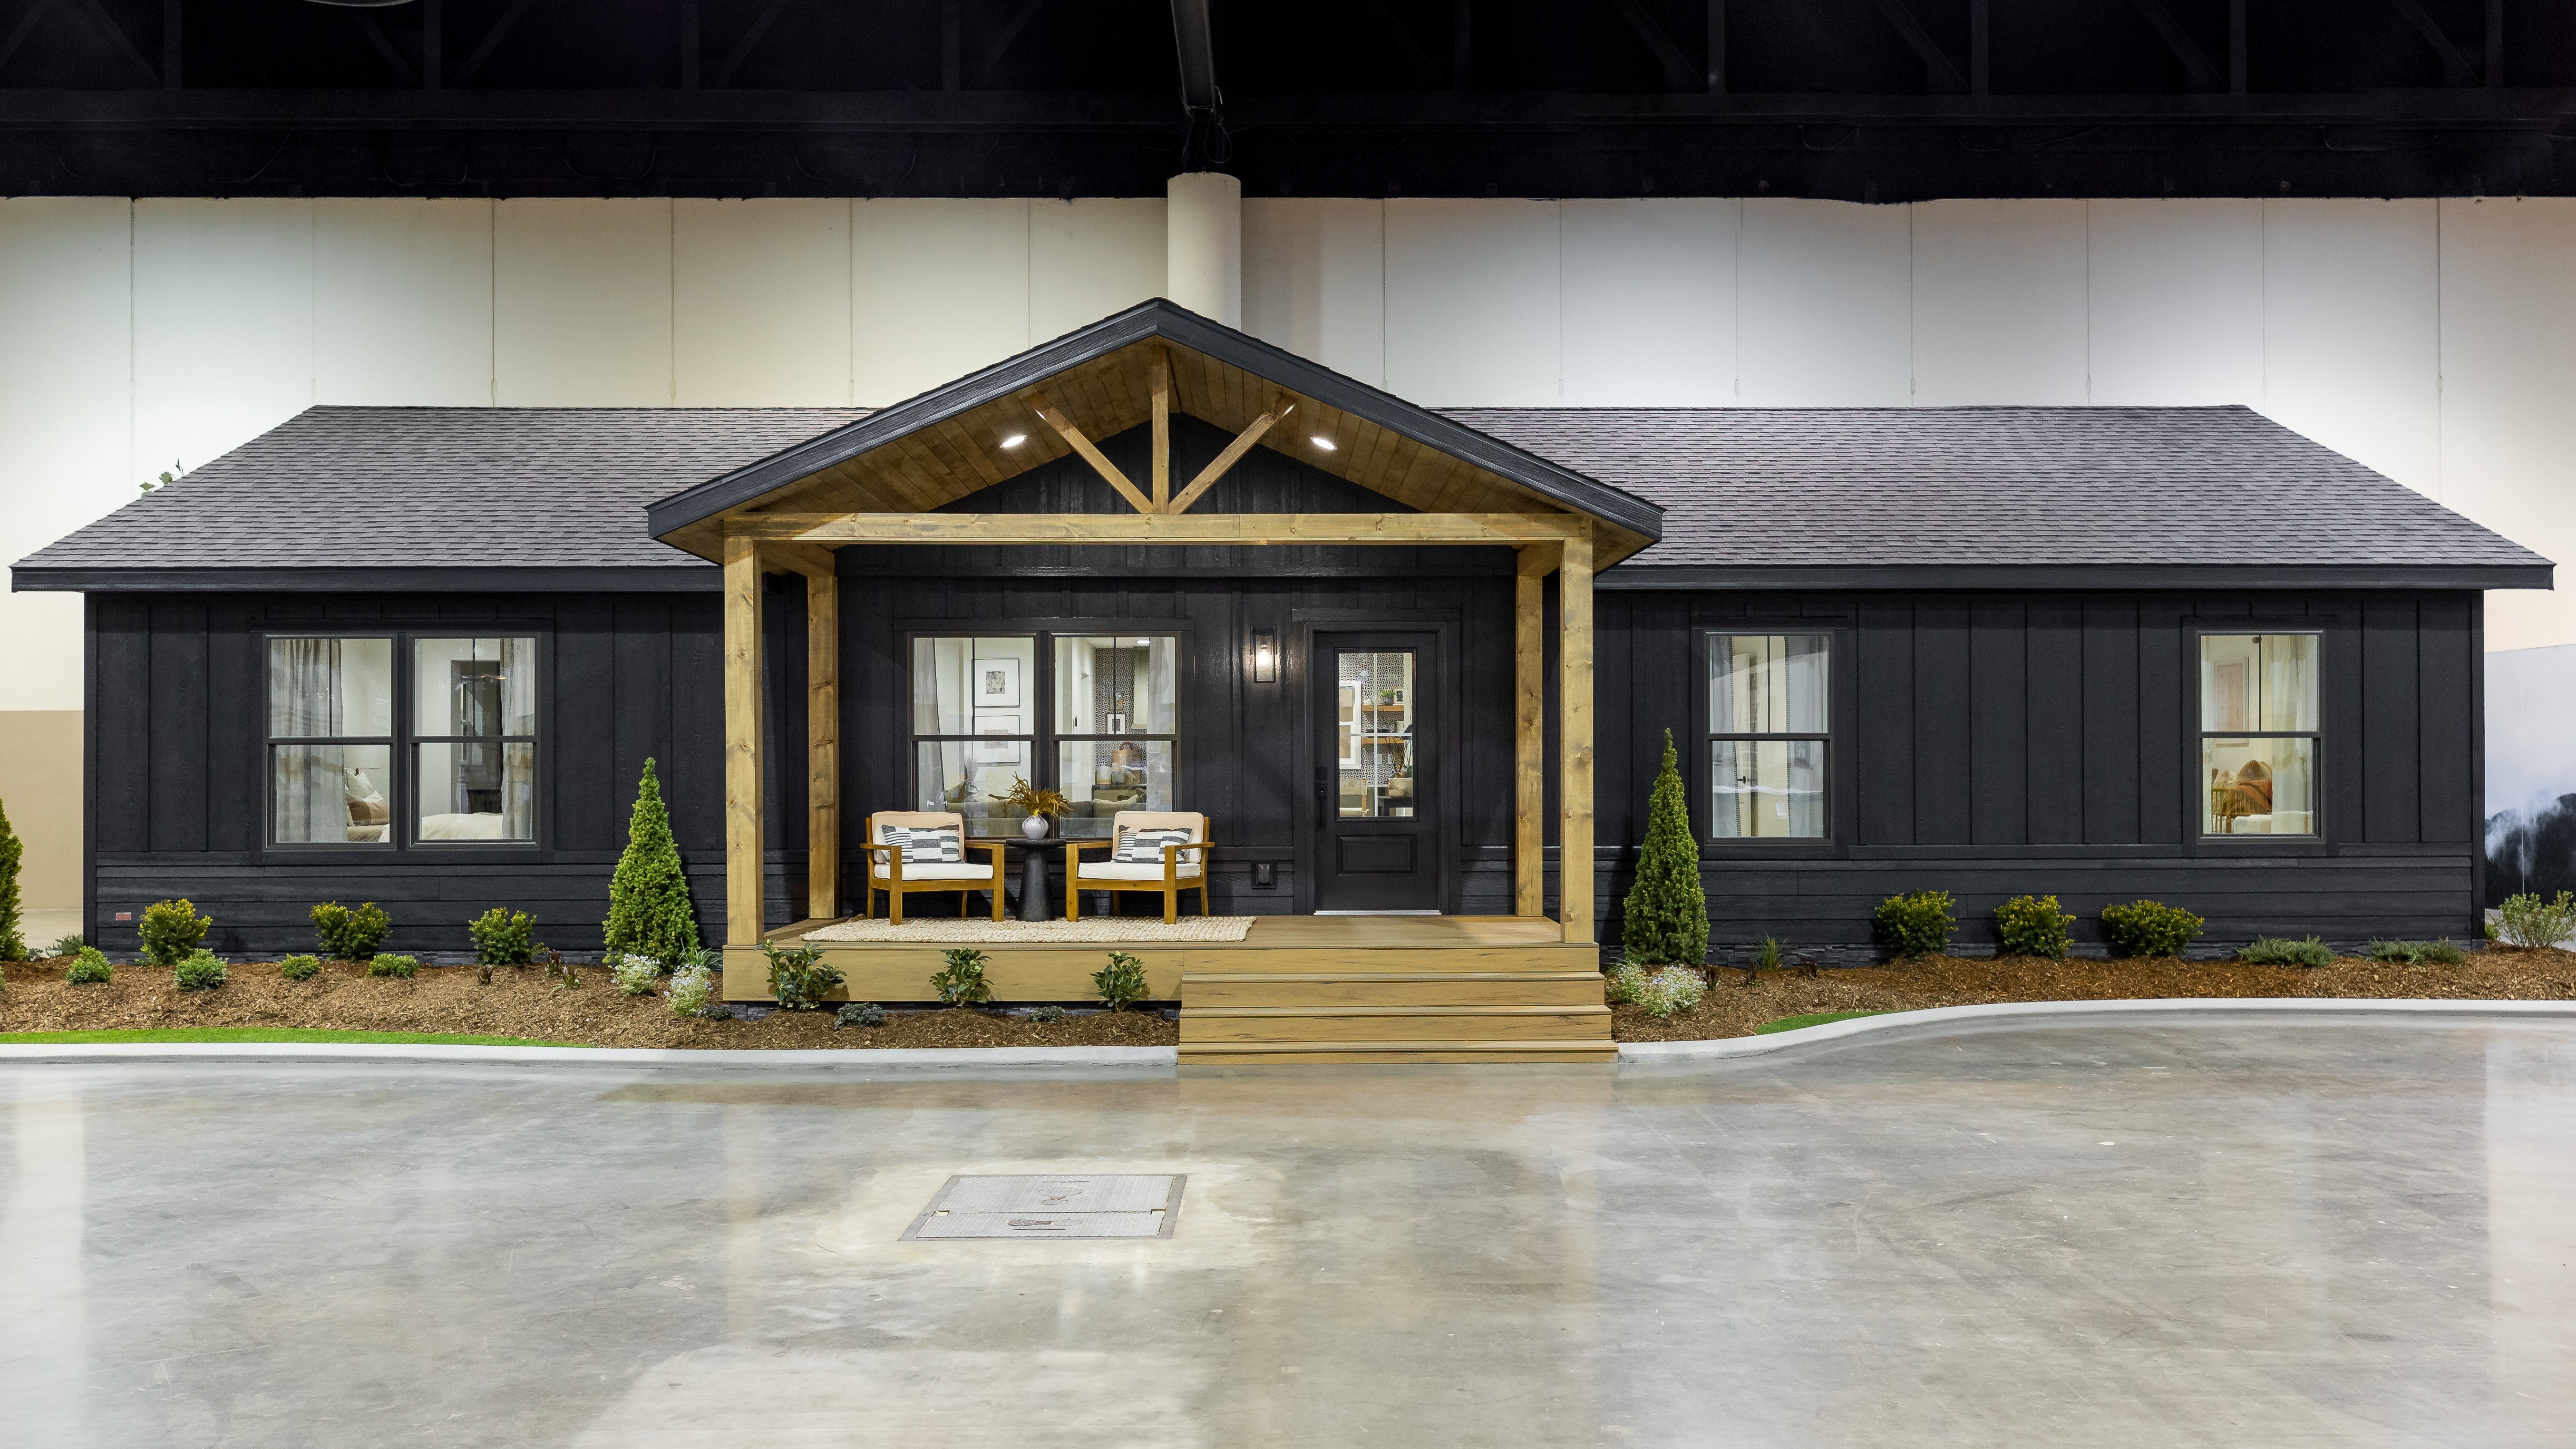 A Clayton net zero home at Berkshire Hathaway Stakeholders meeting